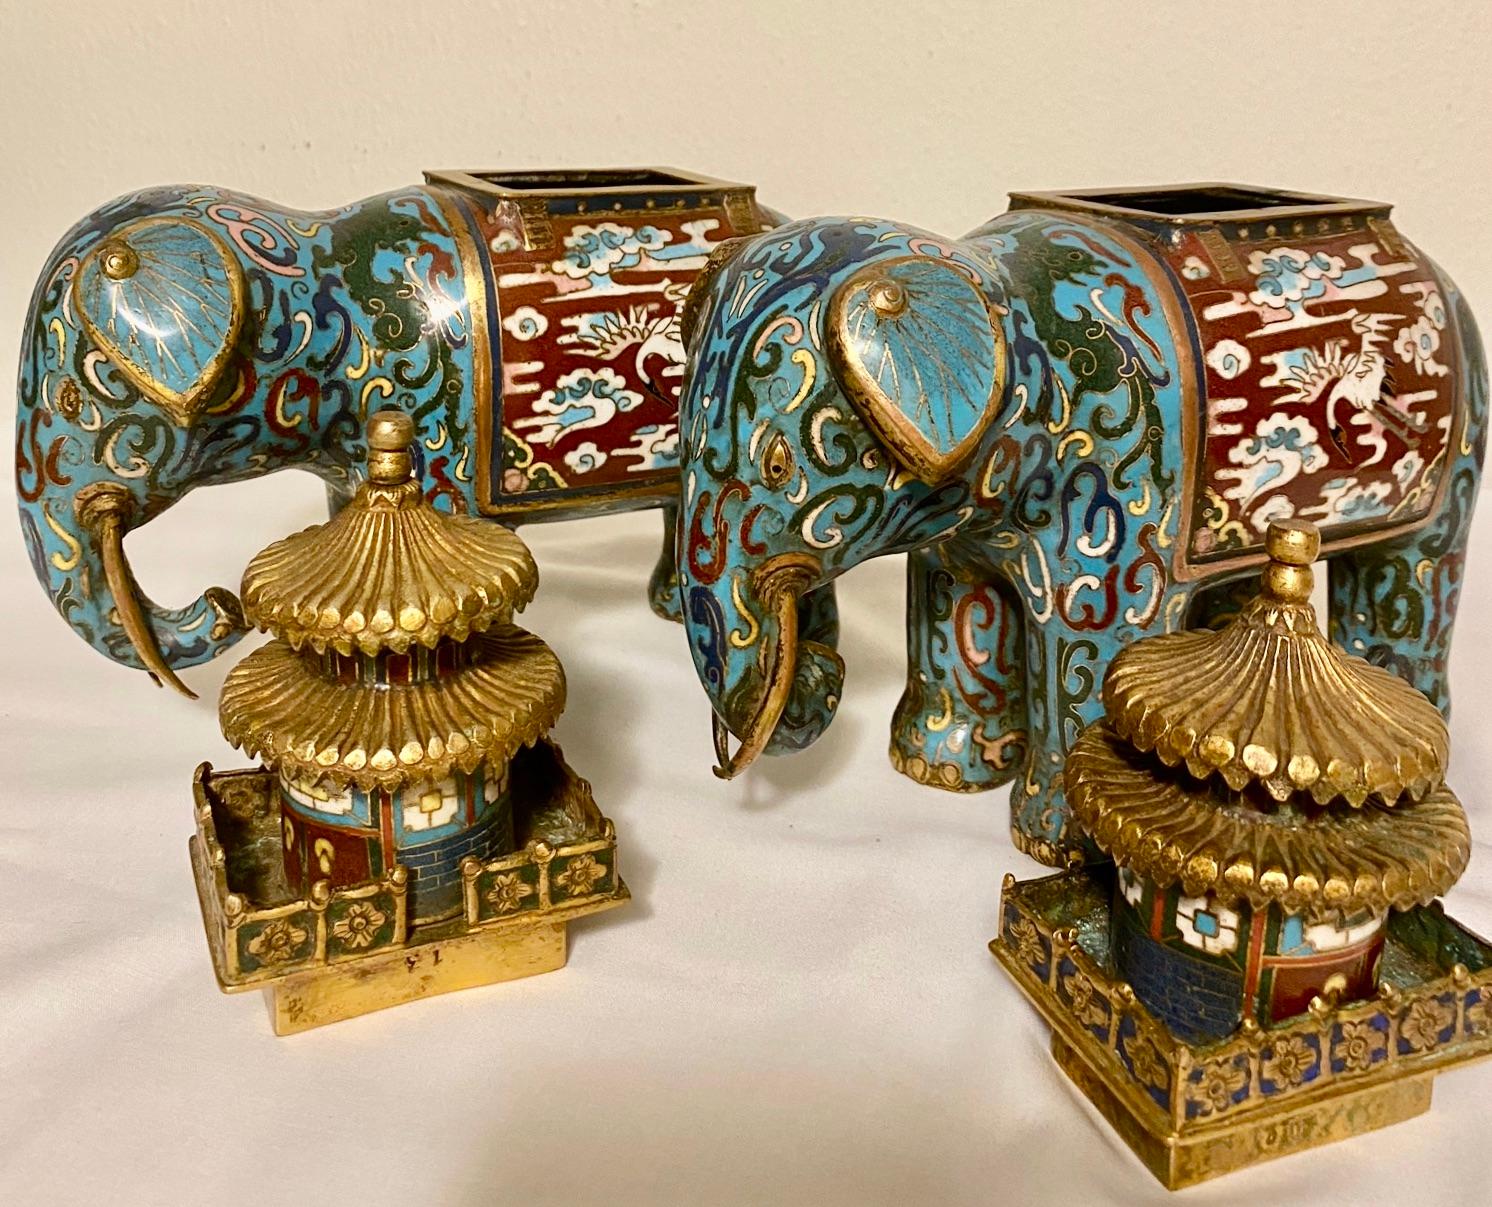 Chinoiserie Pair of Cloisonné Elephant Incense Burners, China, c. 1900